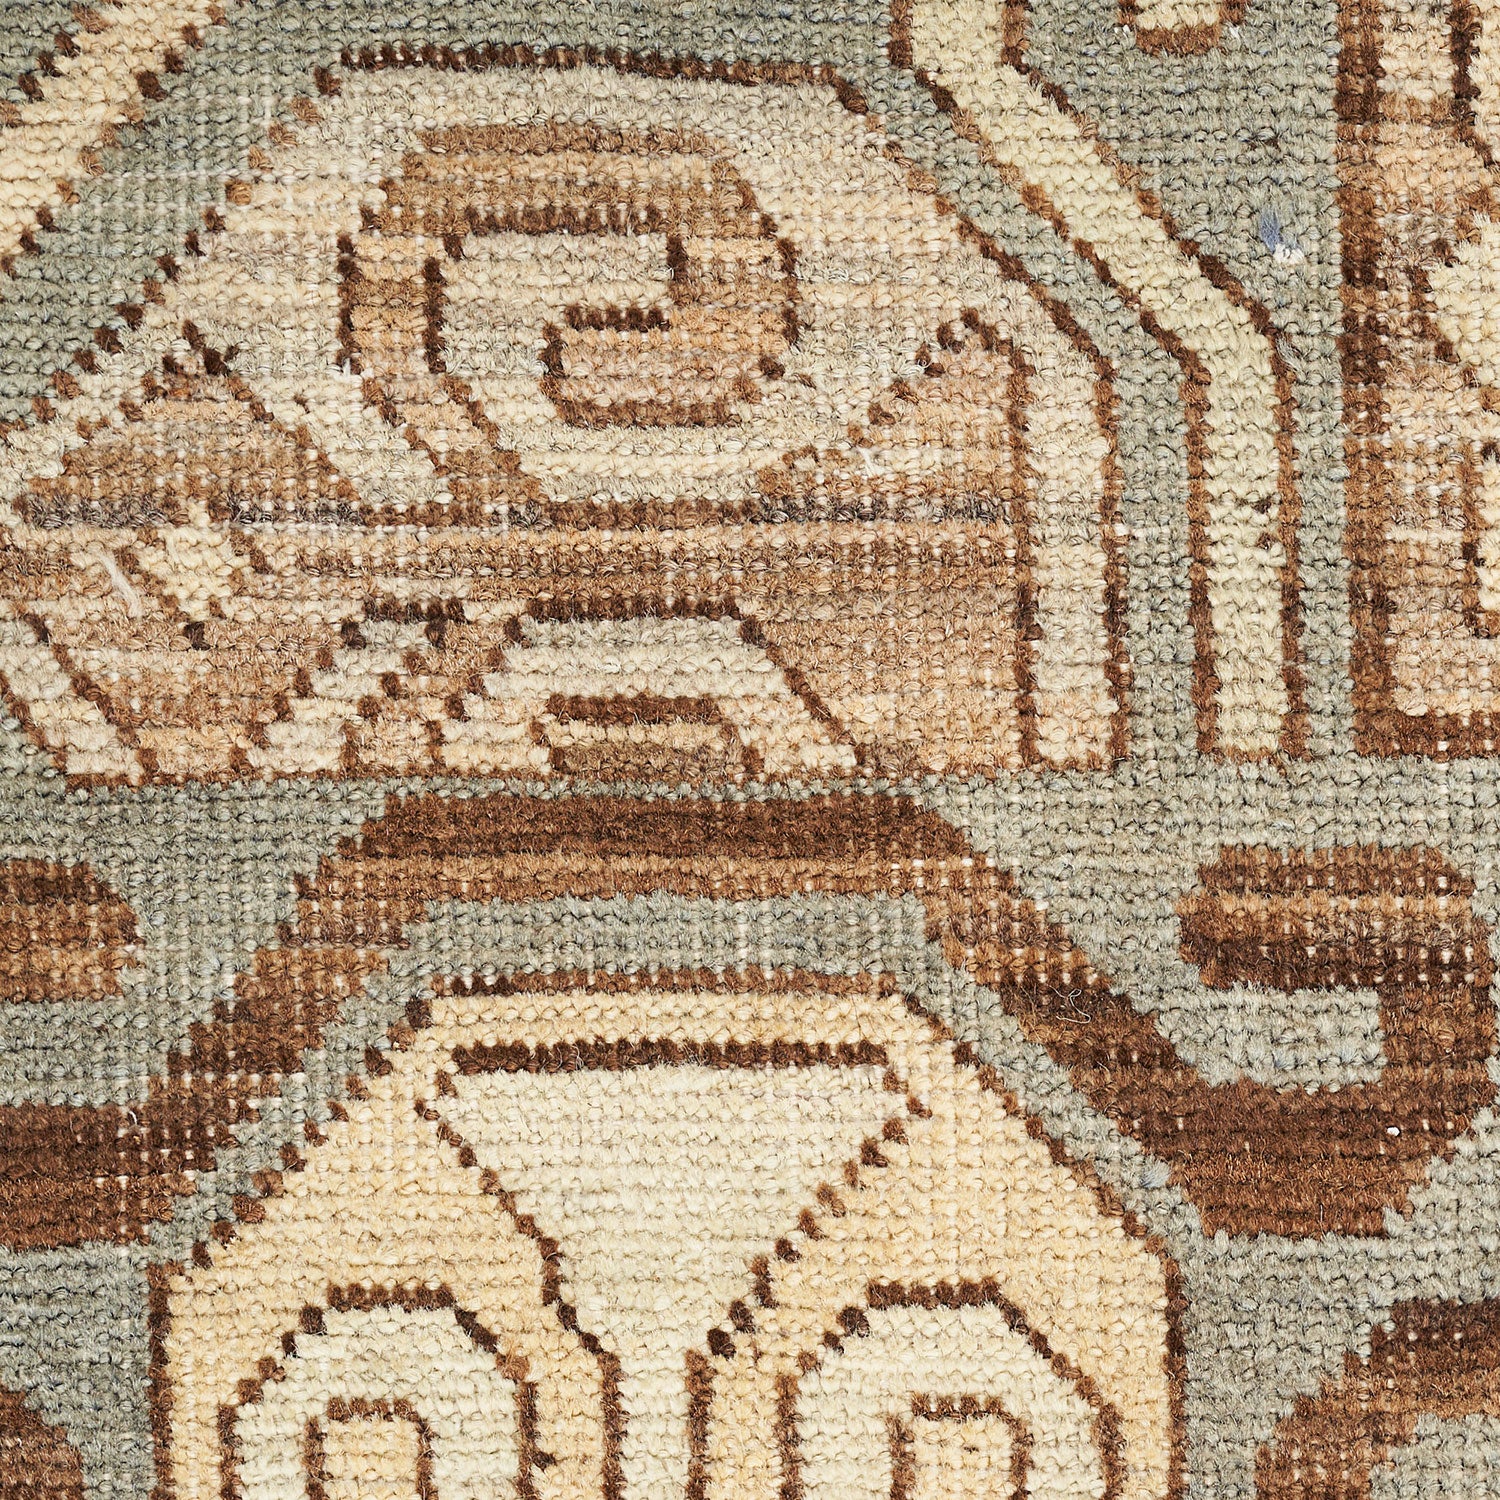 Close-up of a hand-woven rug showcasing a meticulously crafted geometric pattern.